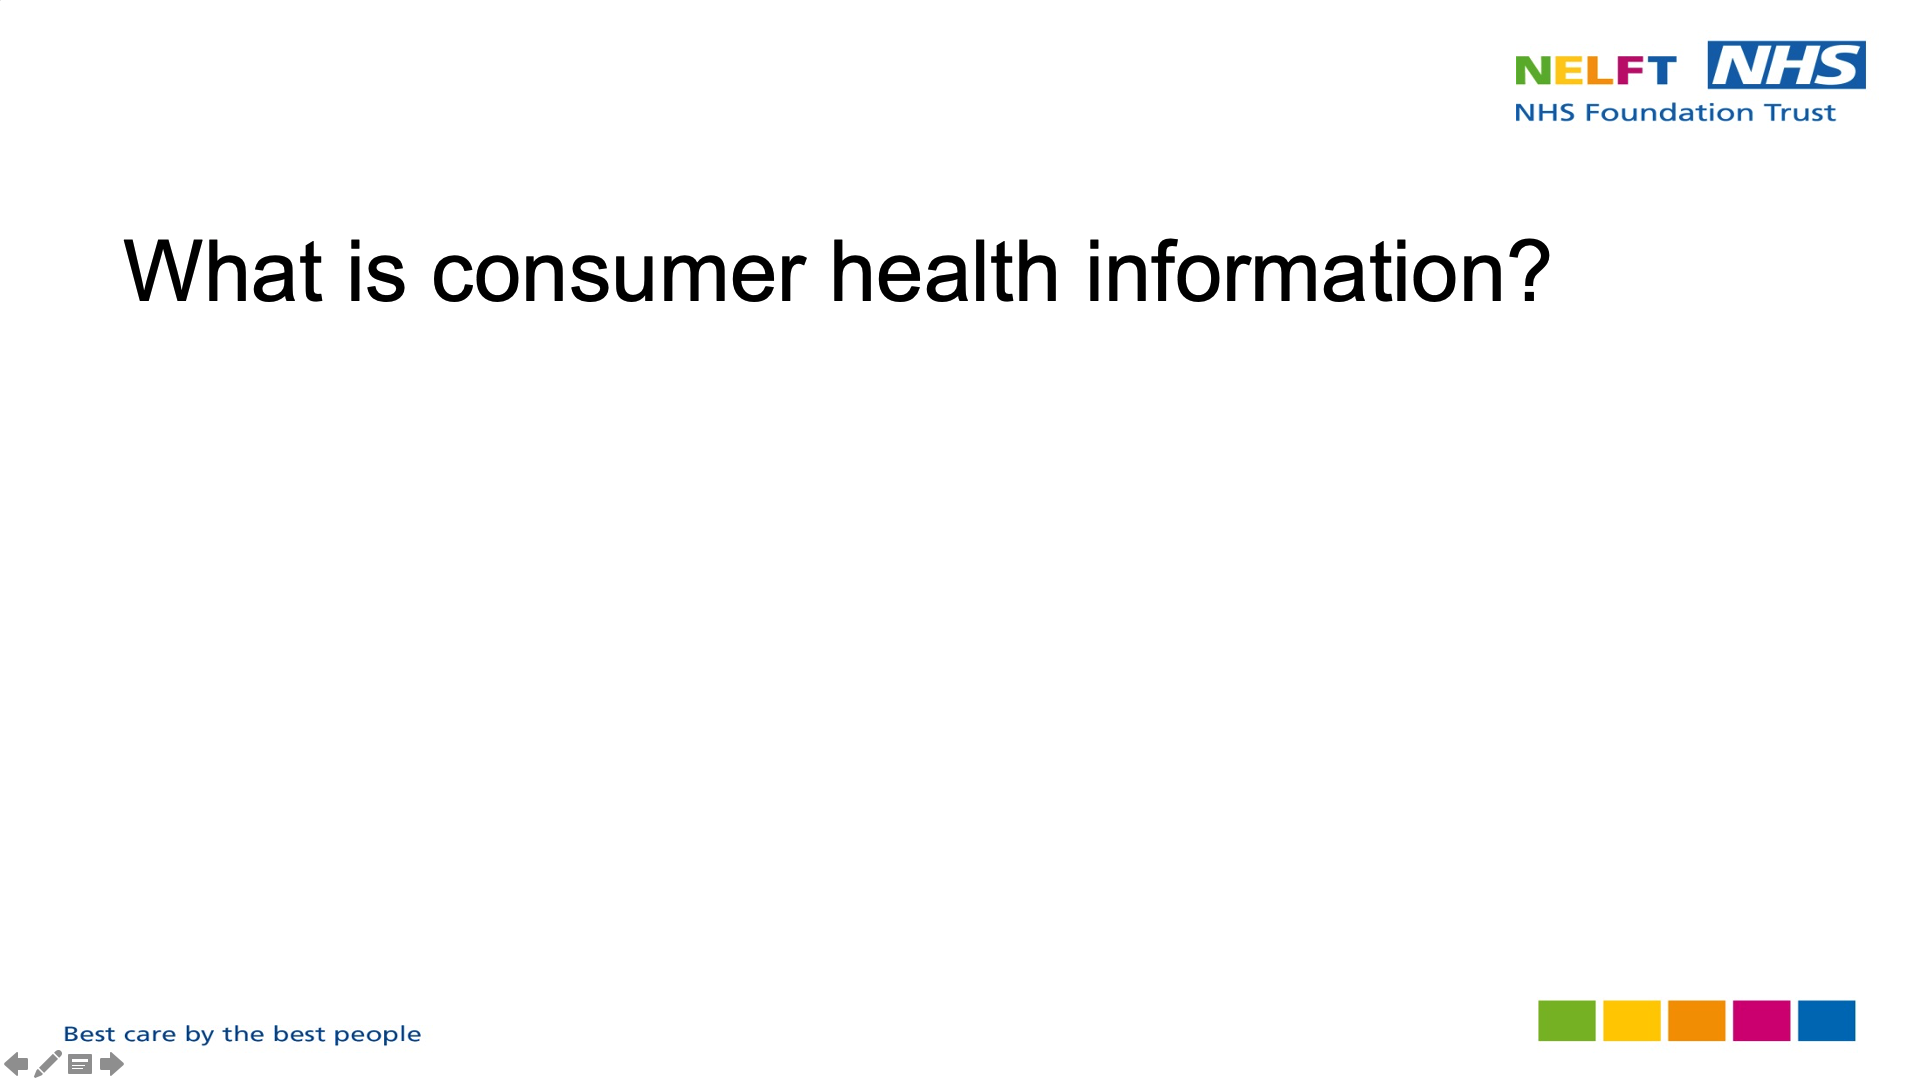 Title card: What is consumer health information?